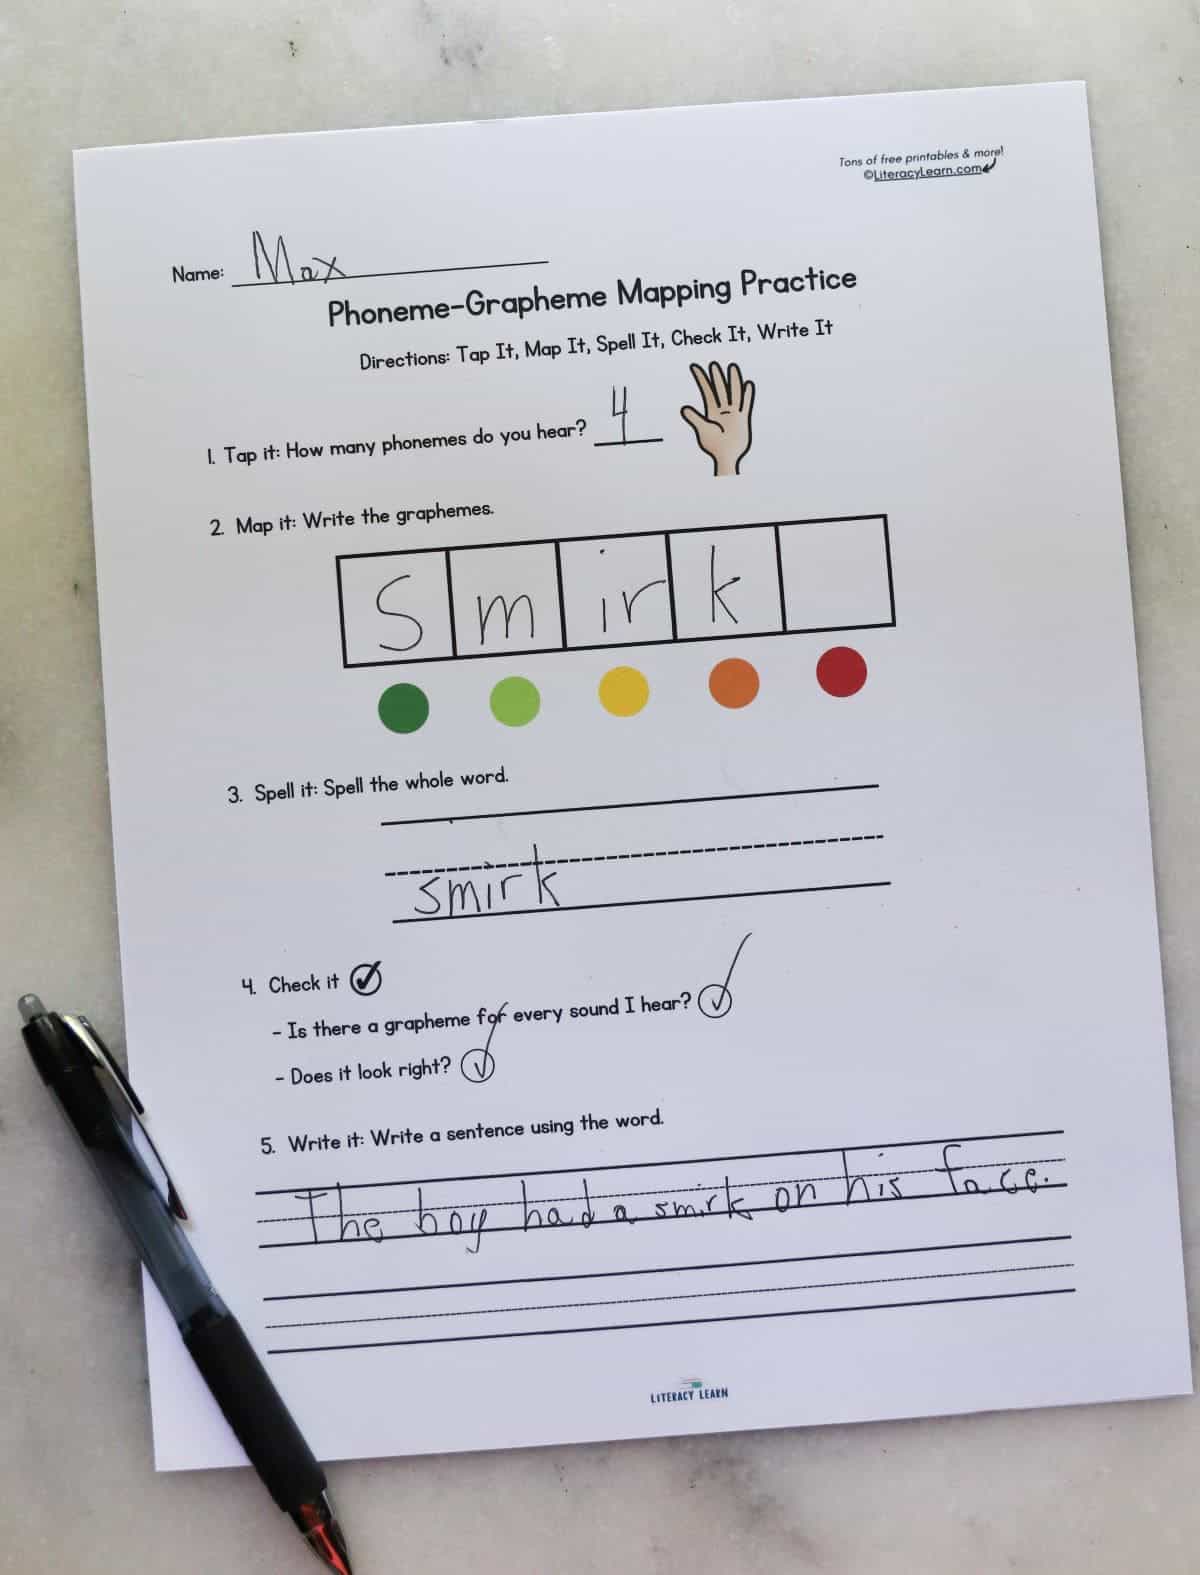 Photo of free worksheet for orthographic mapping and phoneme-grapheme mapping practice.